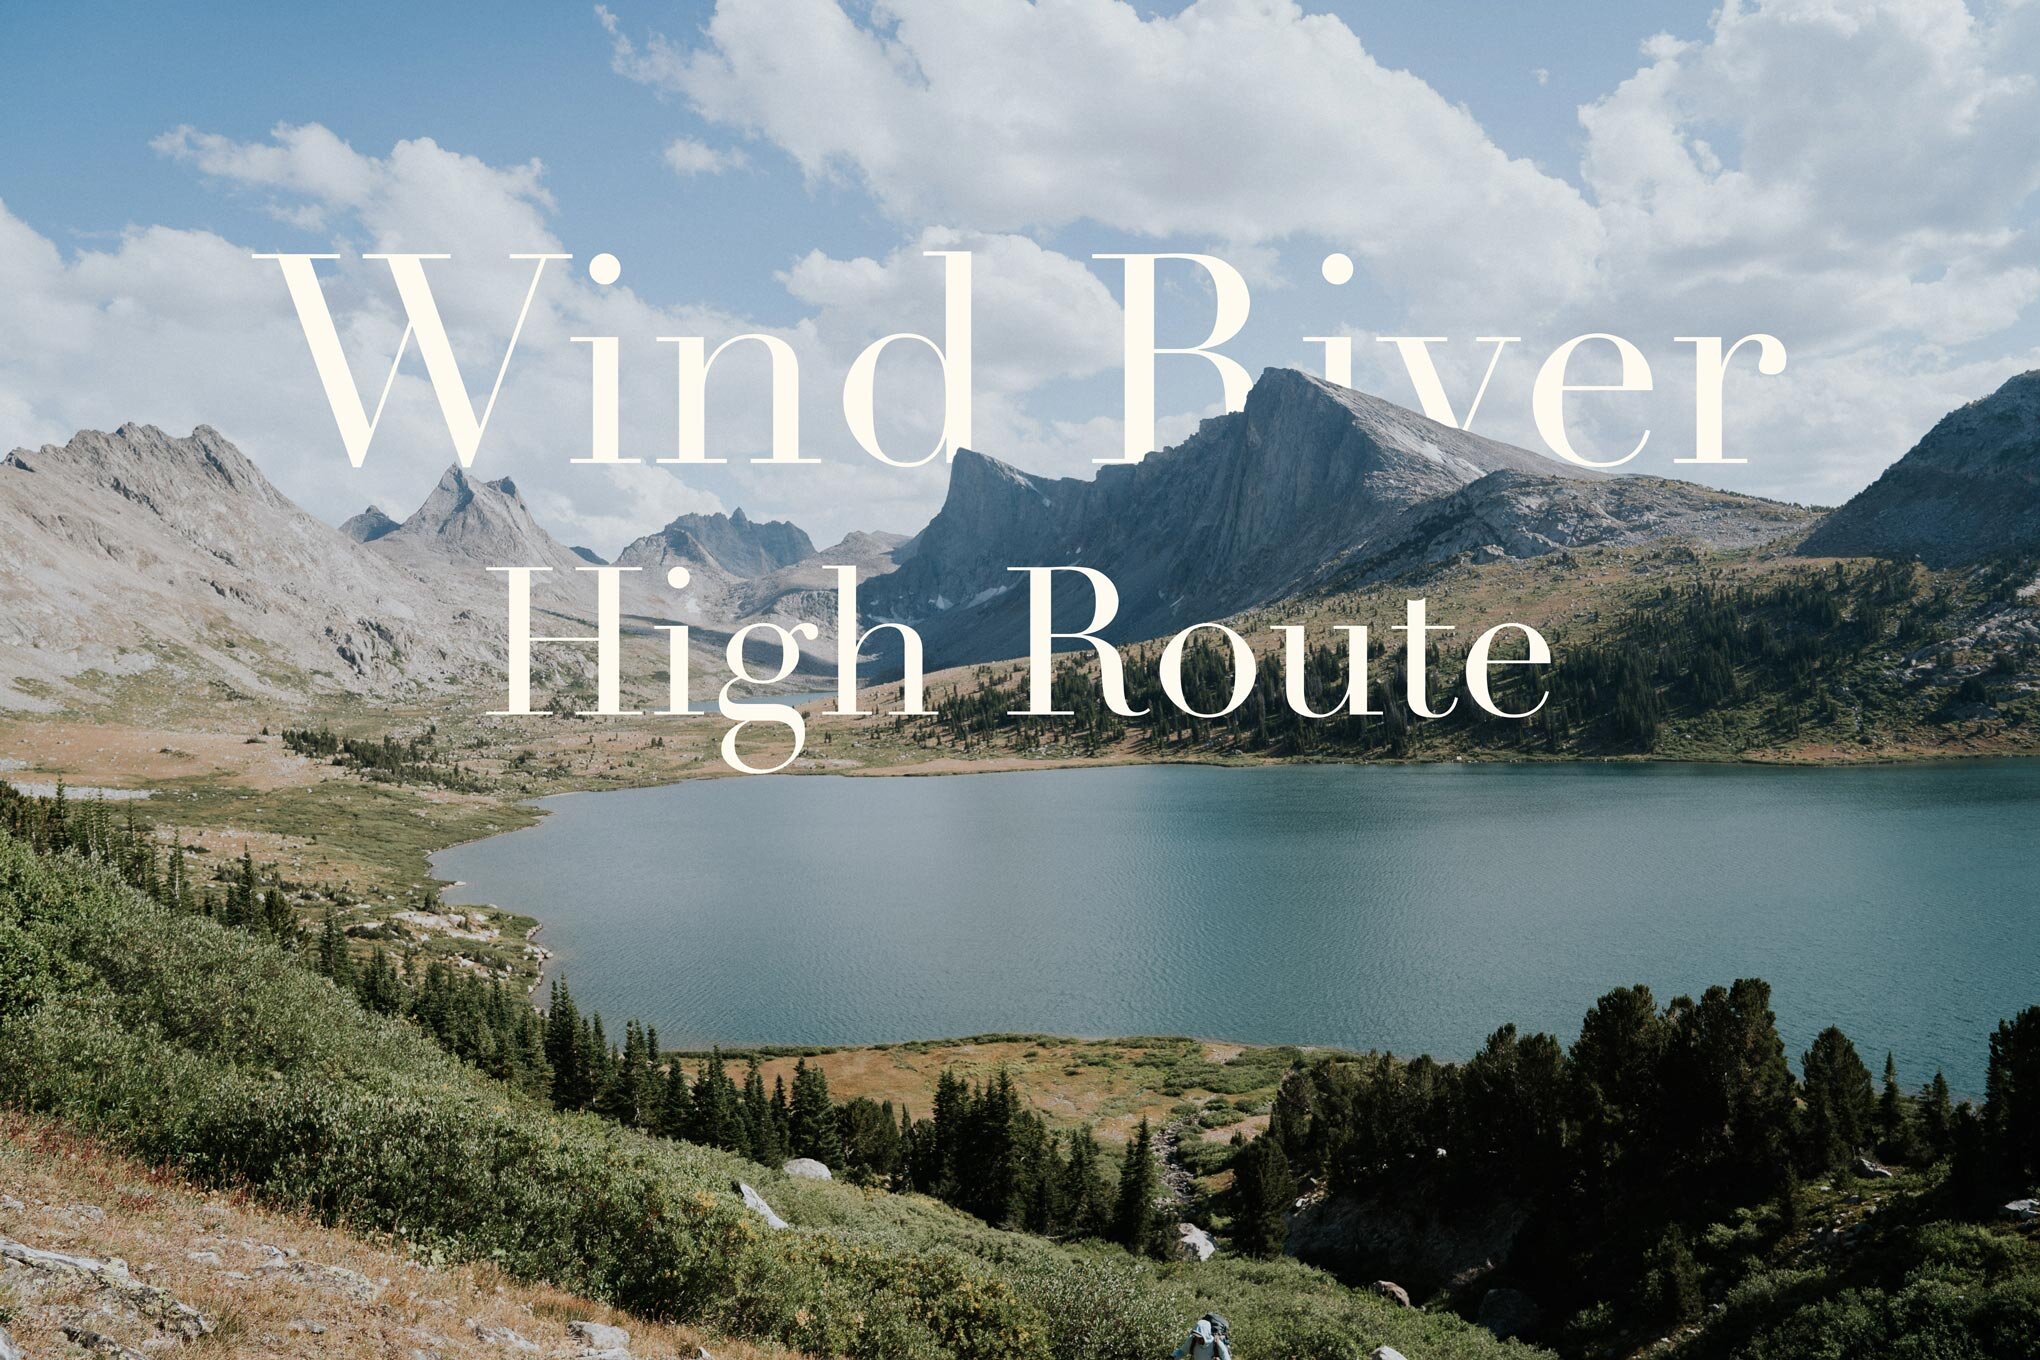 Wind-river-high-route.jpg